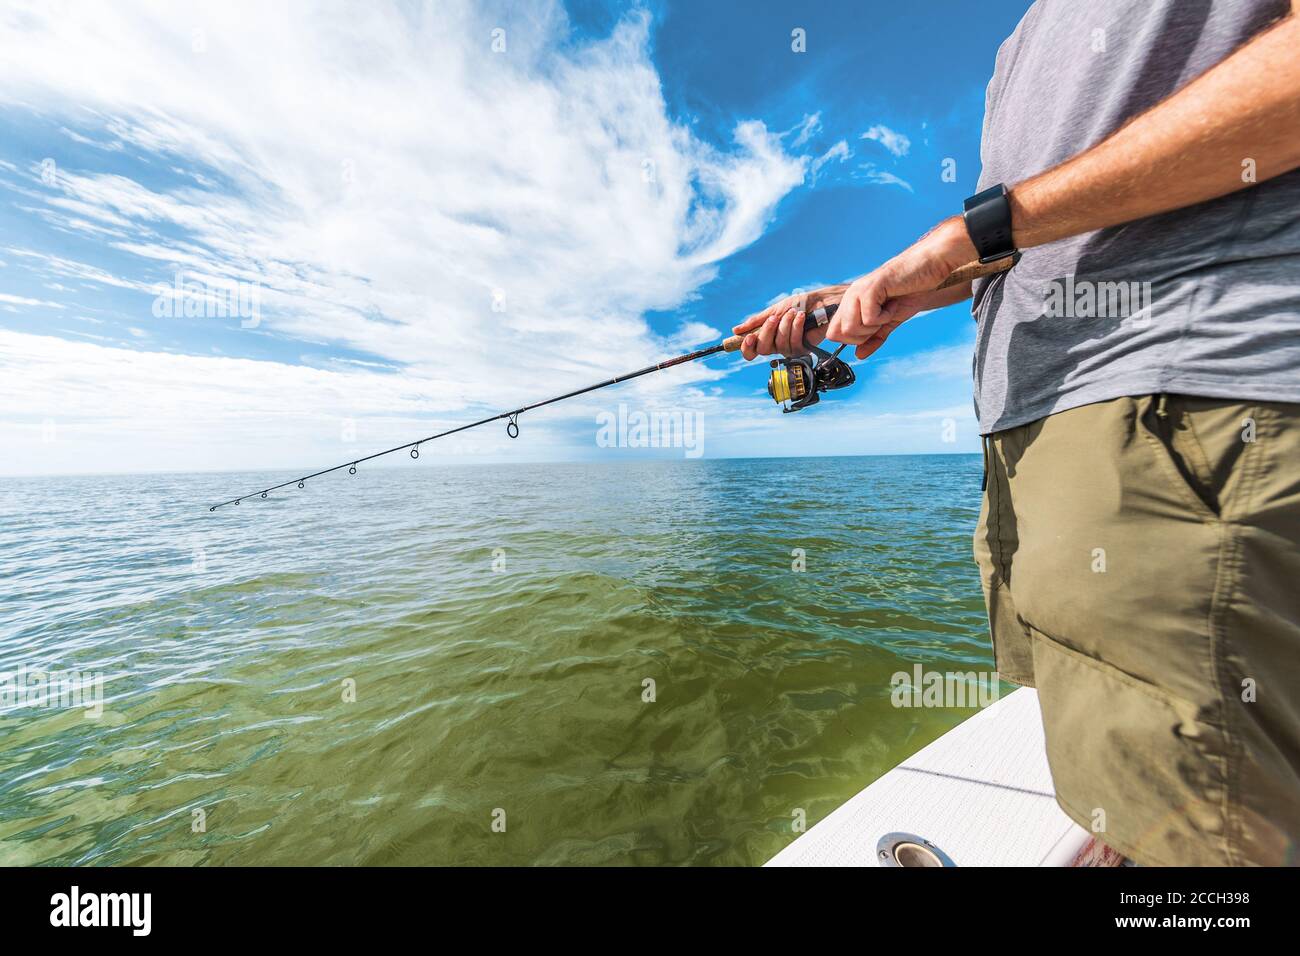 https://c8.alamy.com/comp/2CCH398/fishing-rod-wheel-man-fishing-from-fisherman-boat-in-florida-wearing-smartwatch-wearable-technology-for-outdoor-sport-2CCH398.jpg